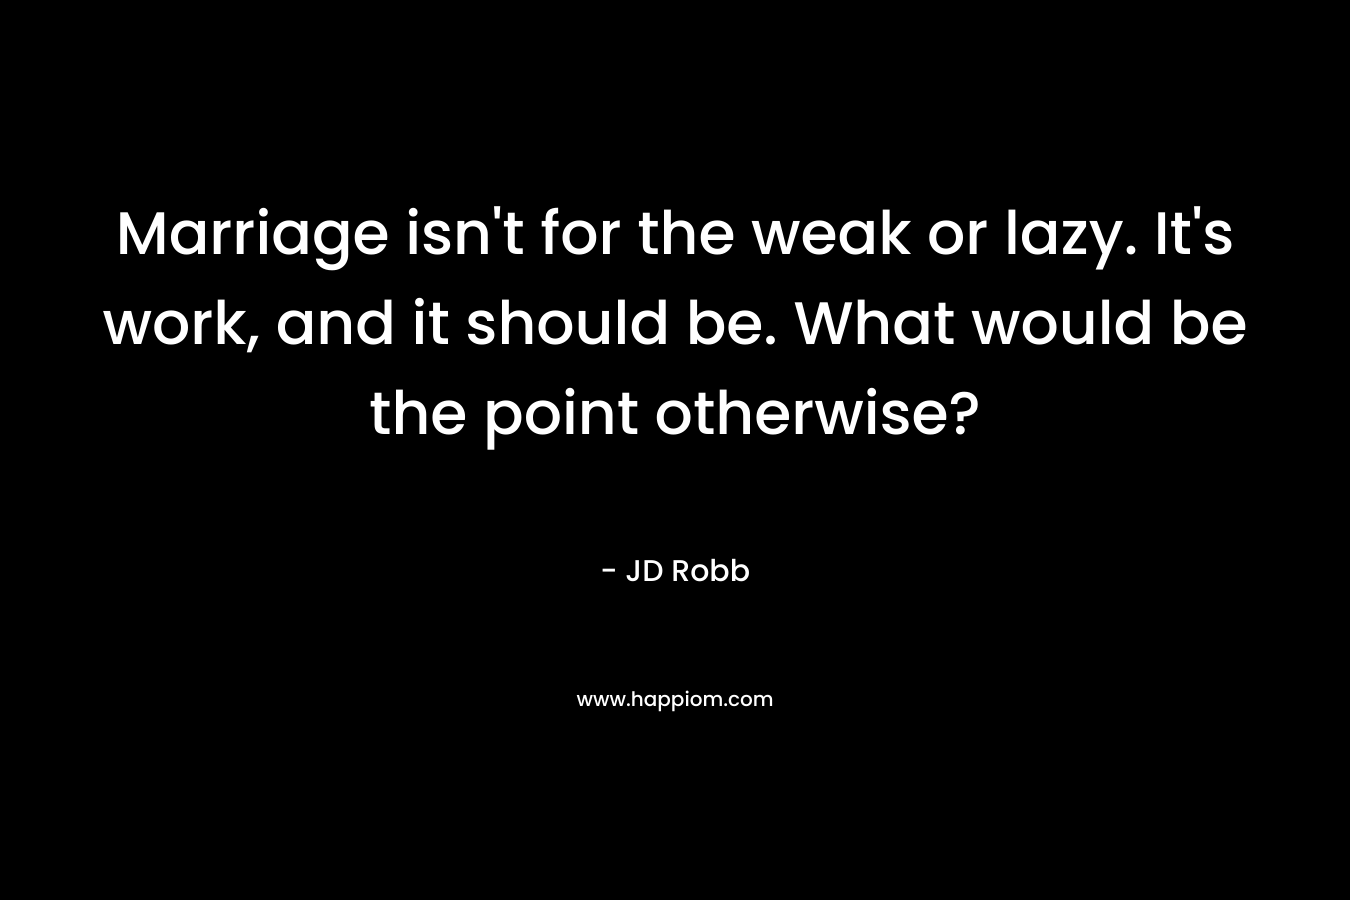 Marriage isn't for the weak or lazy. It's work, and it should be. What would be the point otherwise?